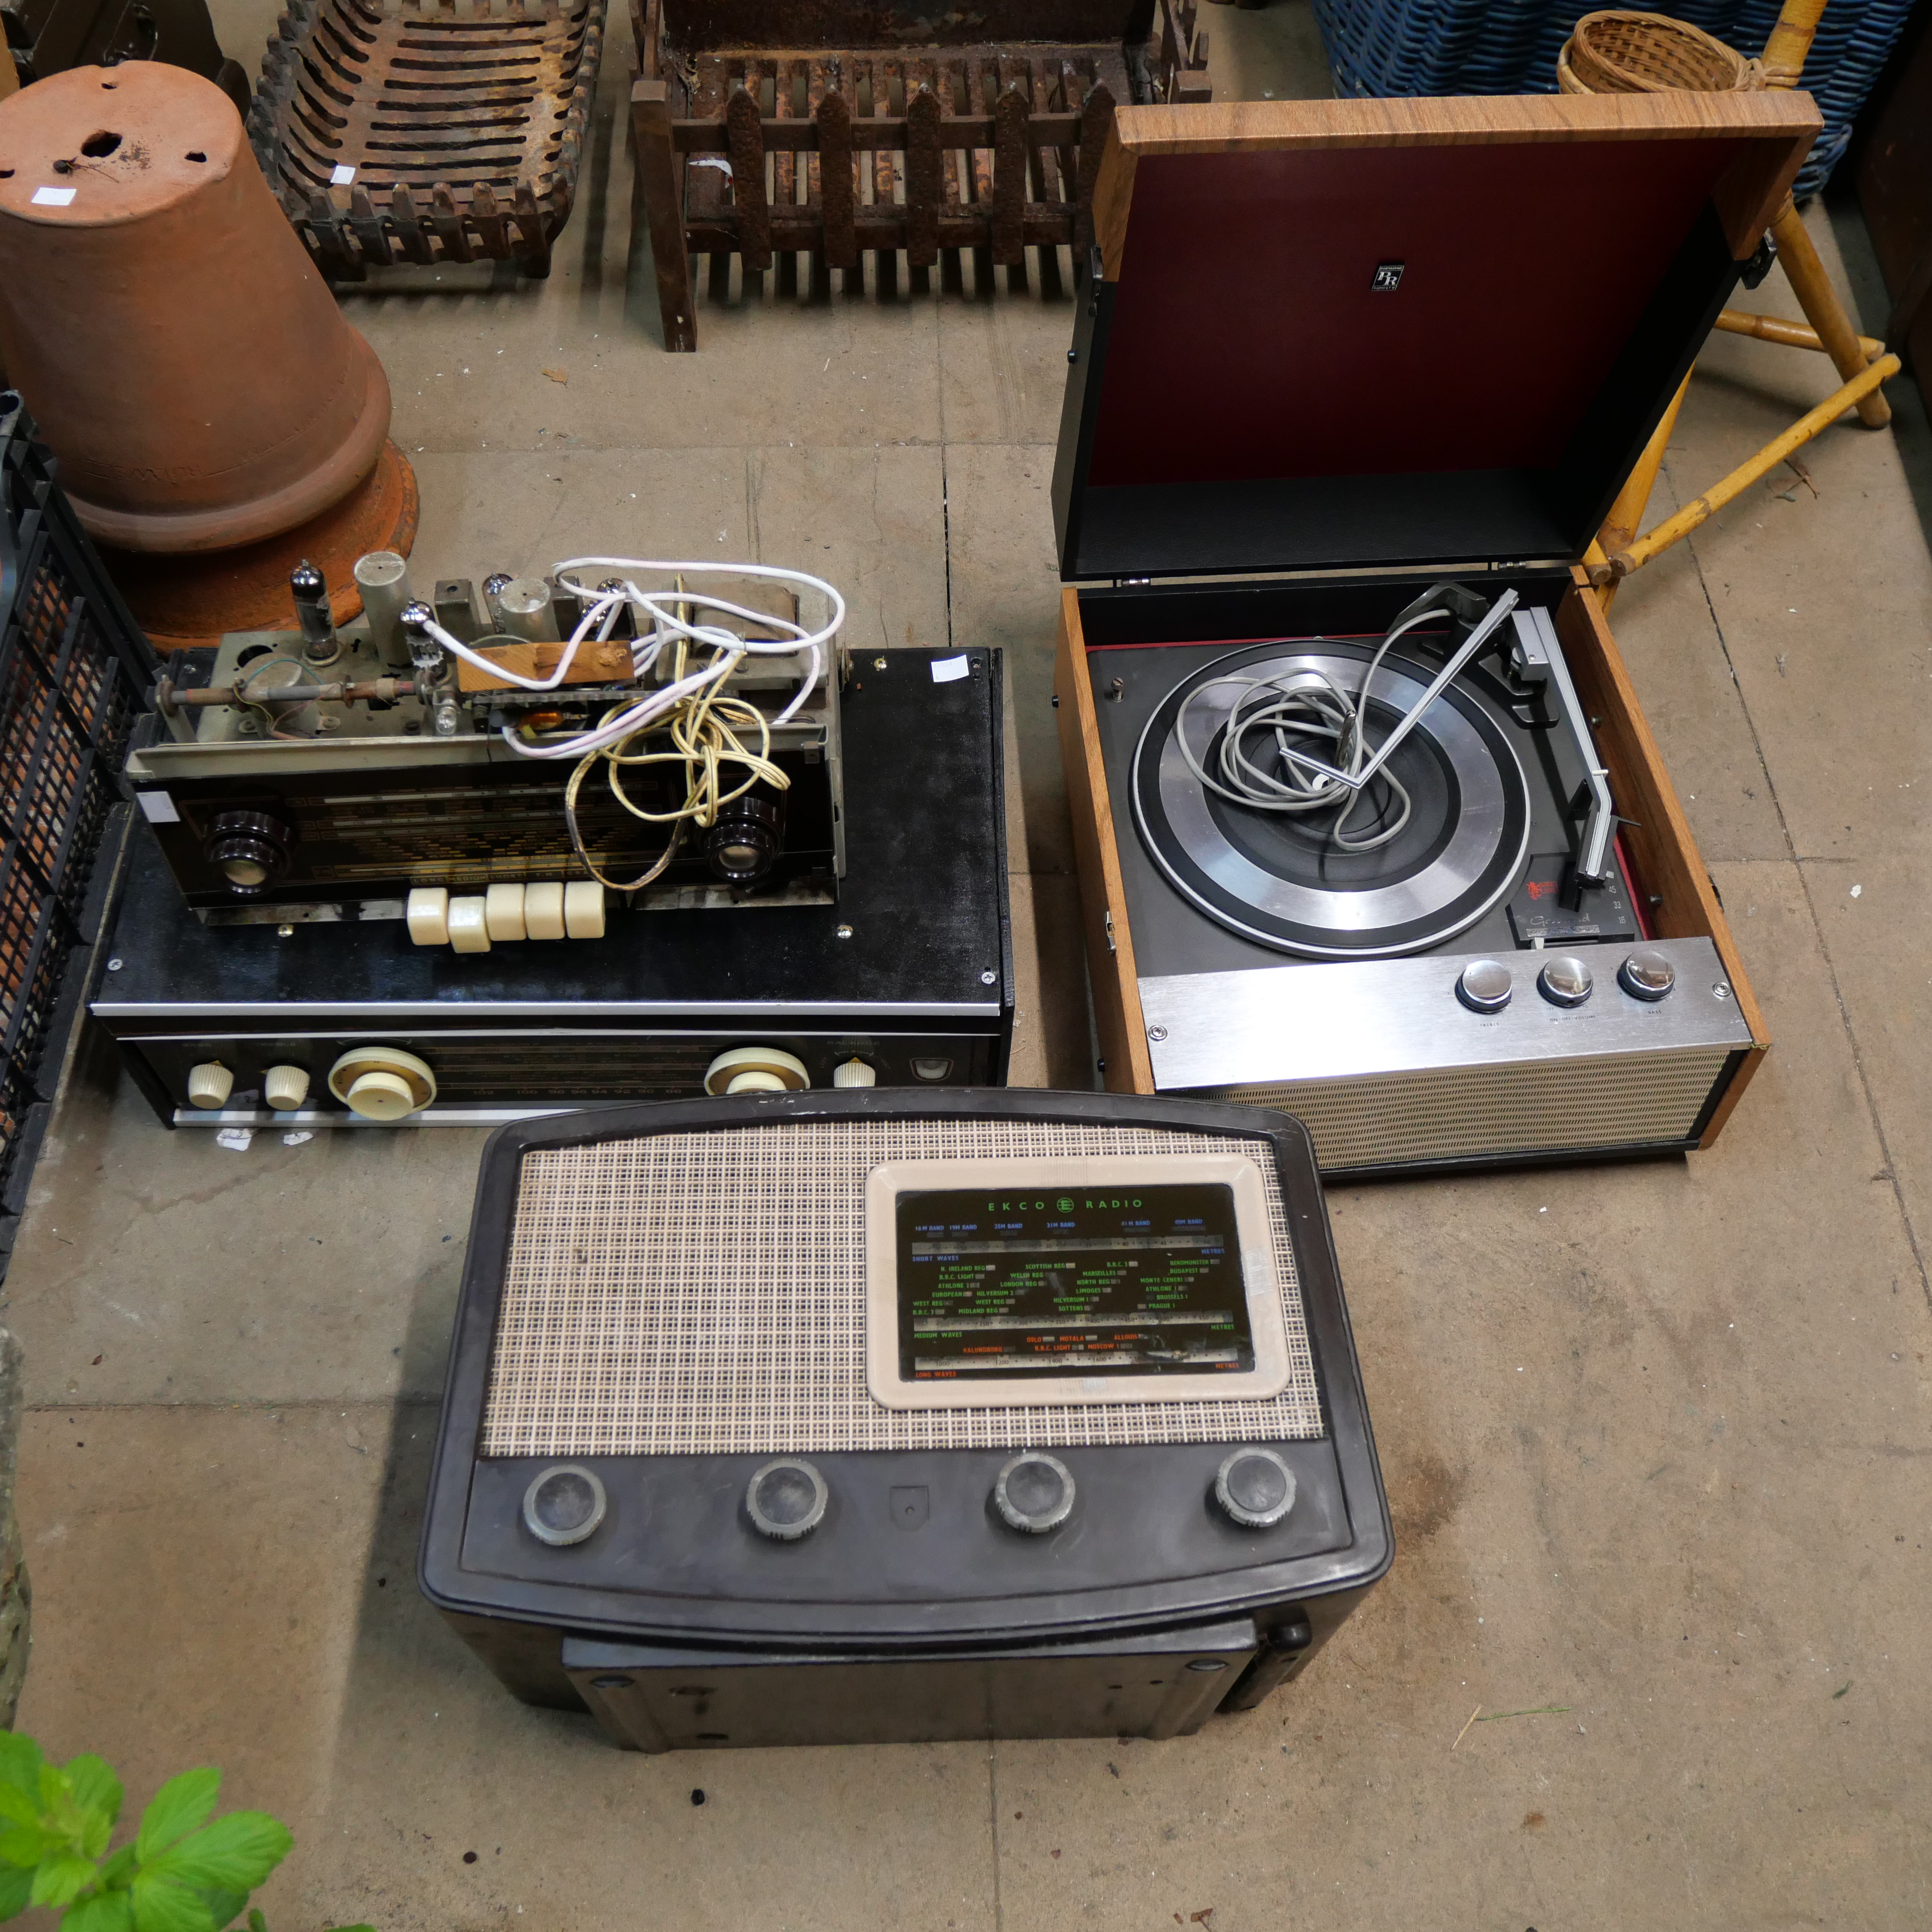 Three radios and a record player